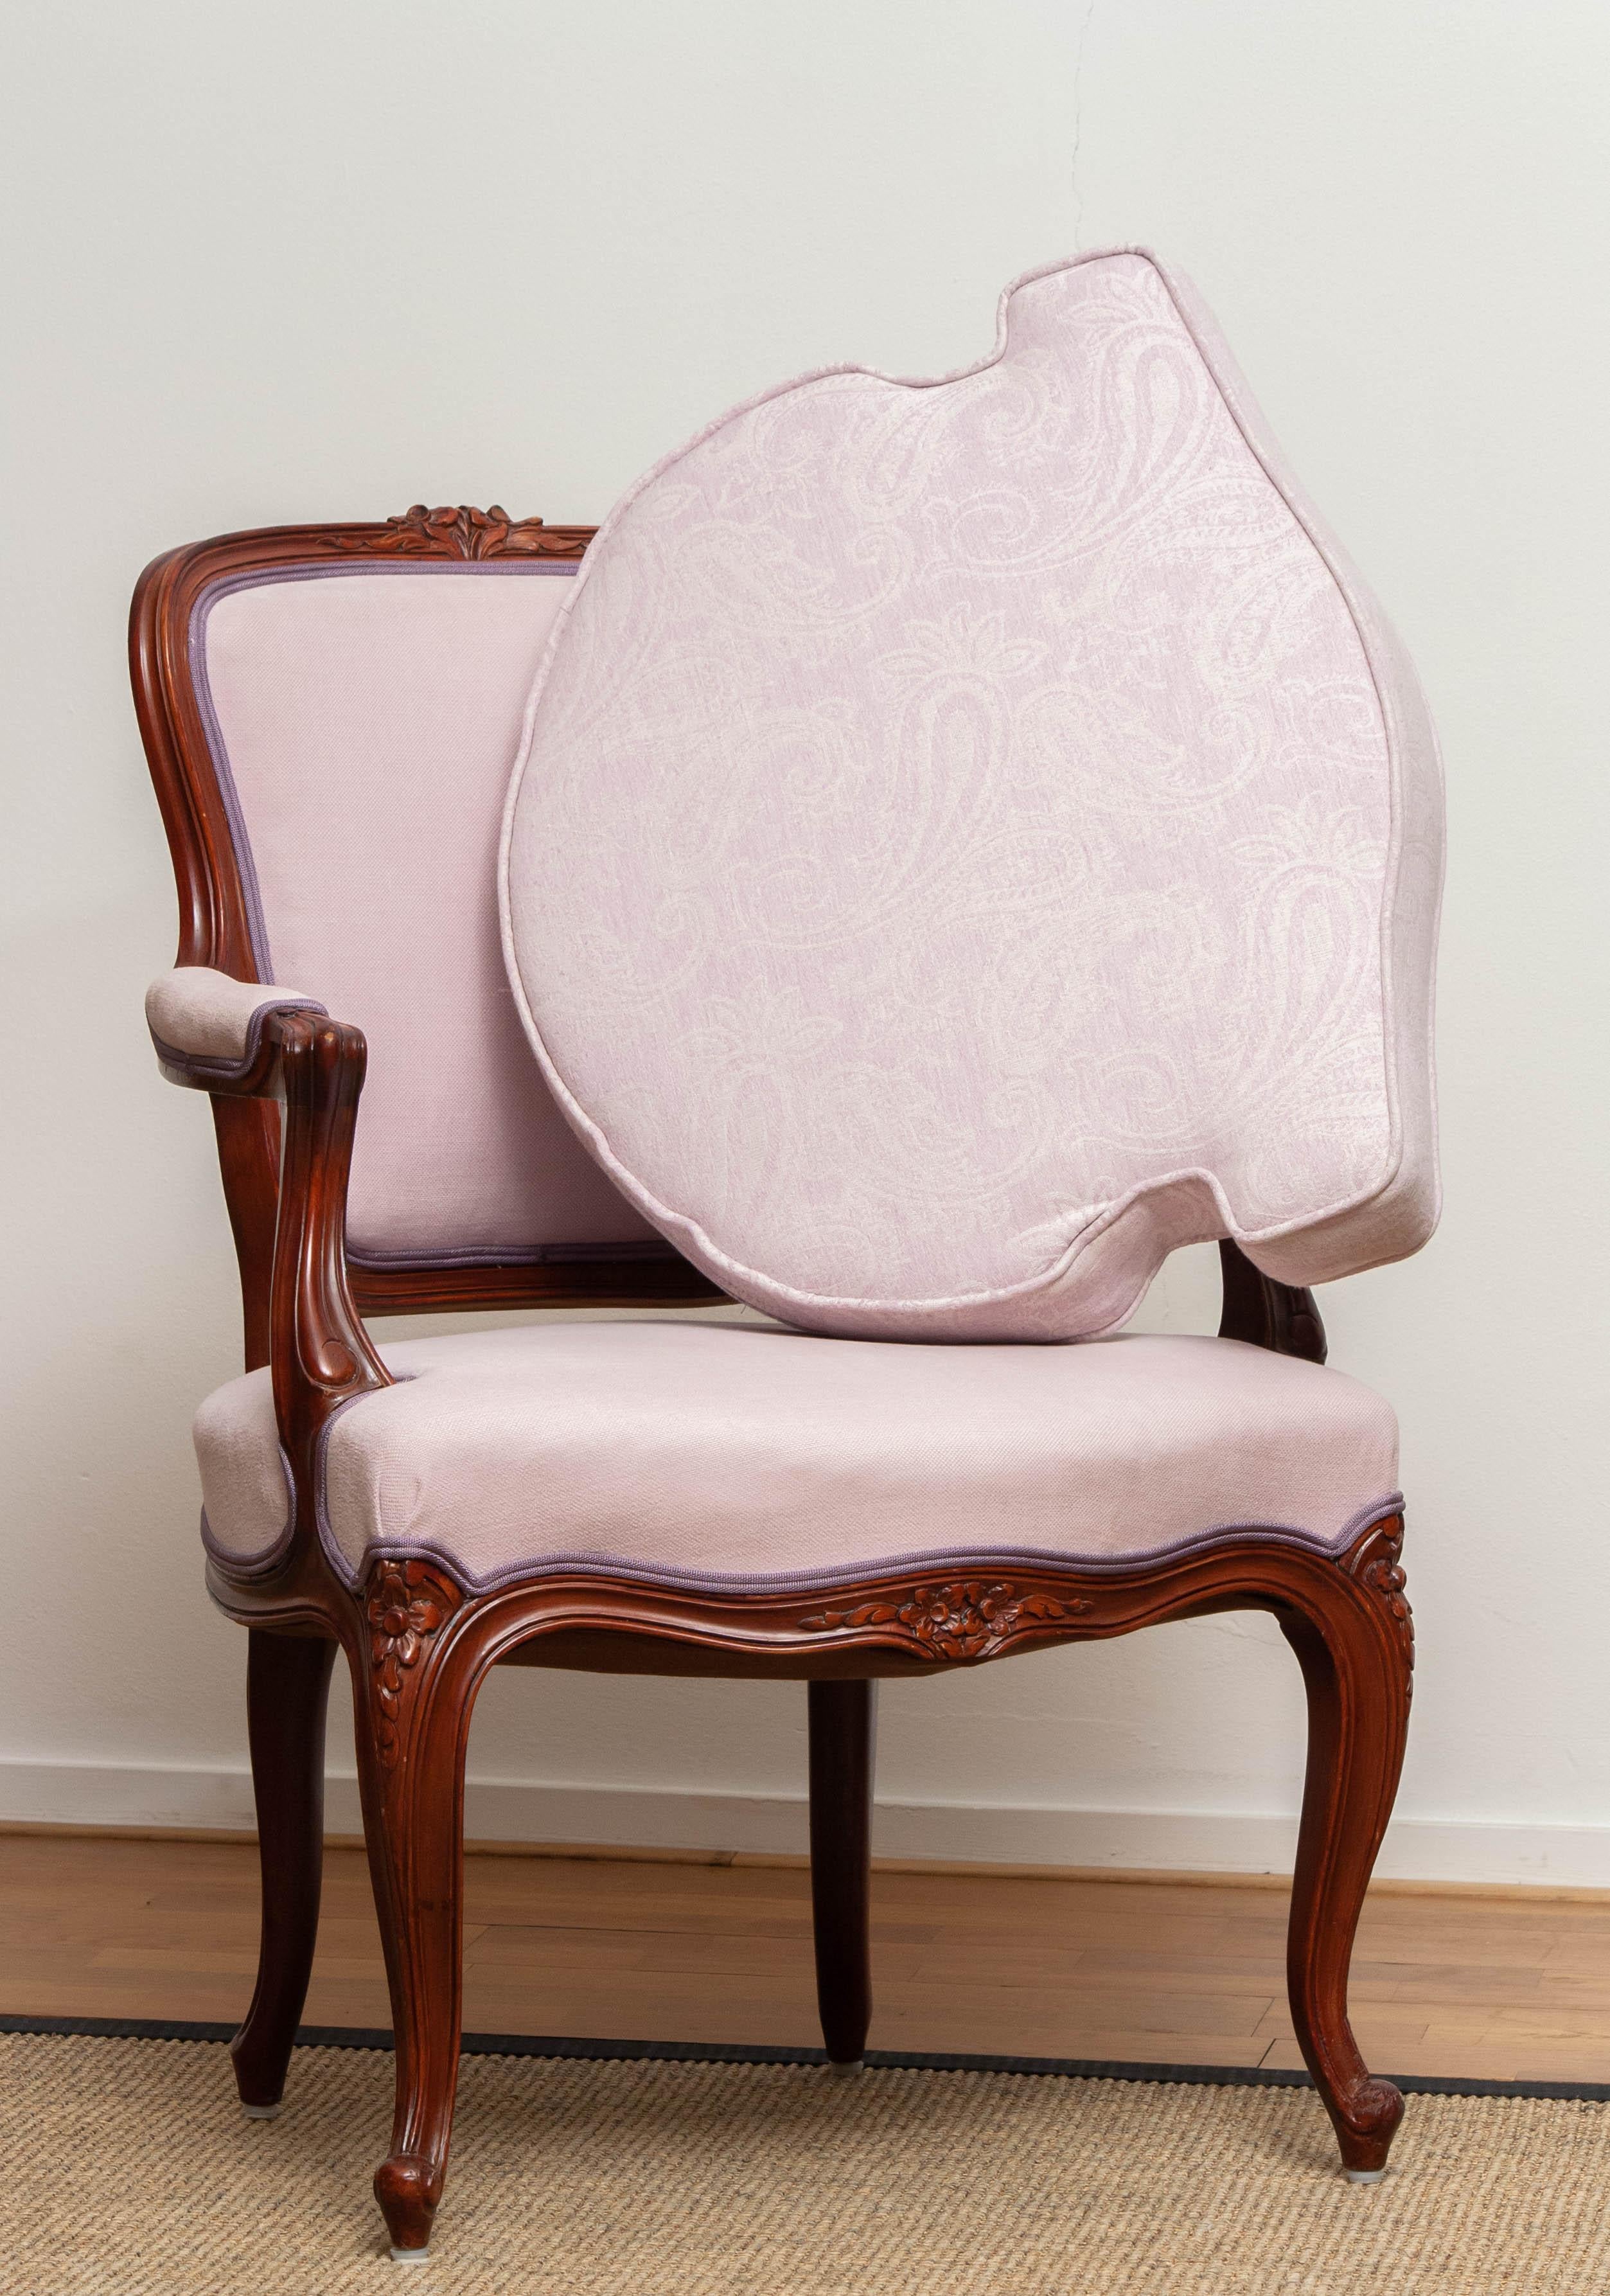 1950 Pair of Pink Swedish Rococo Bergères in the Shabby Chic Technique Chairs F 6